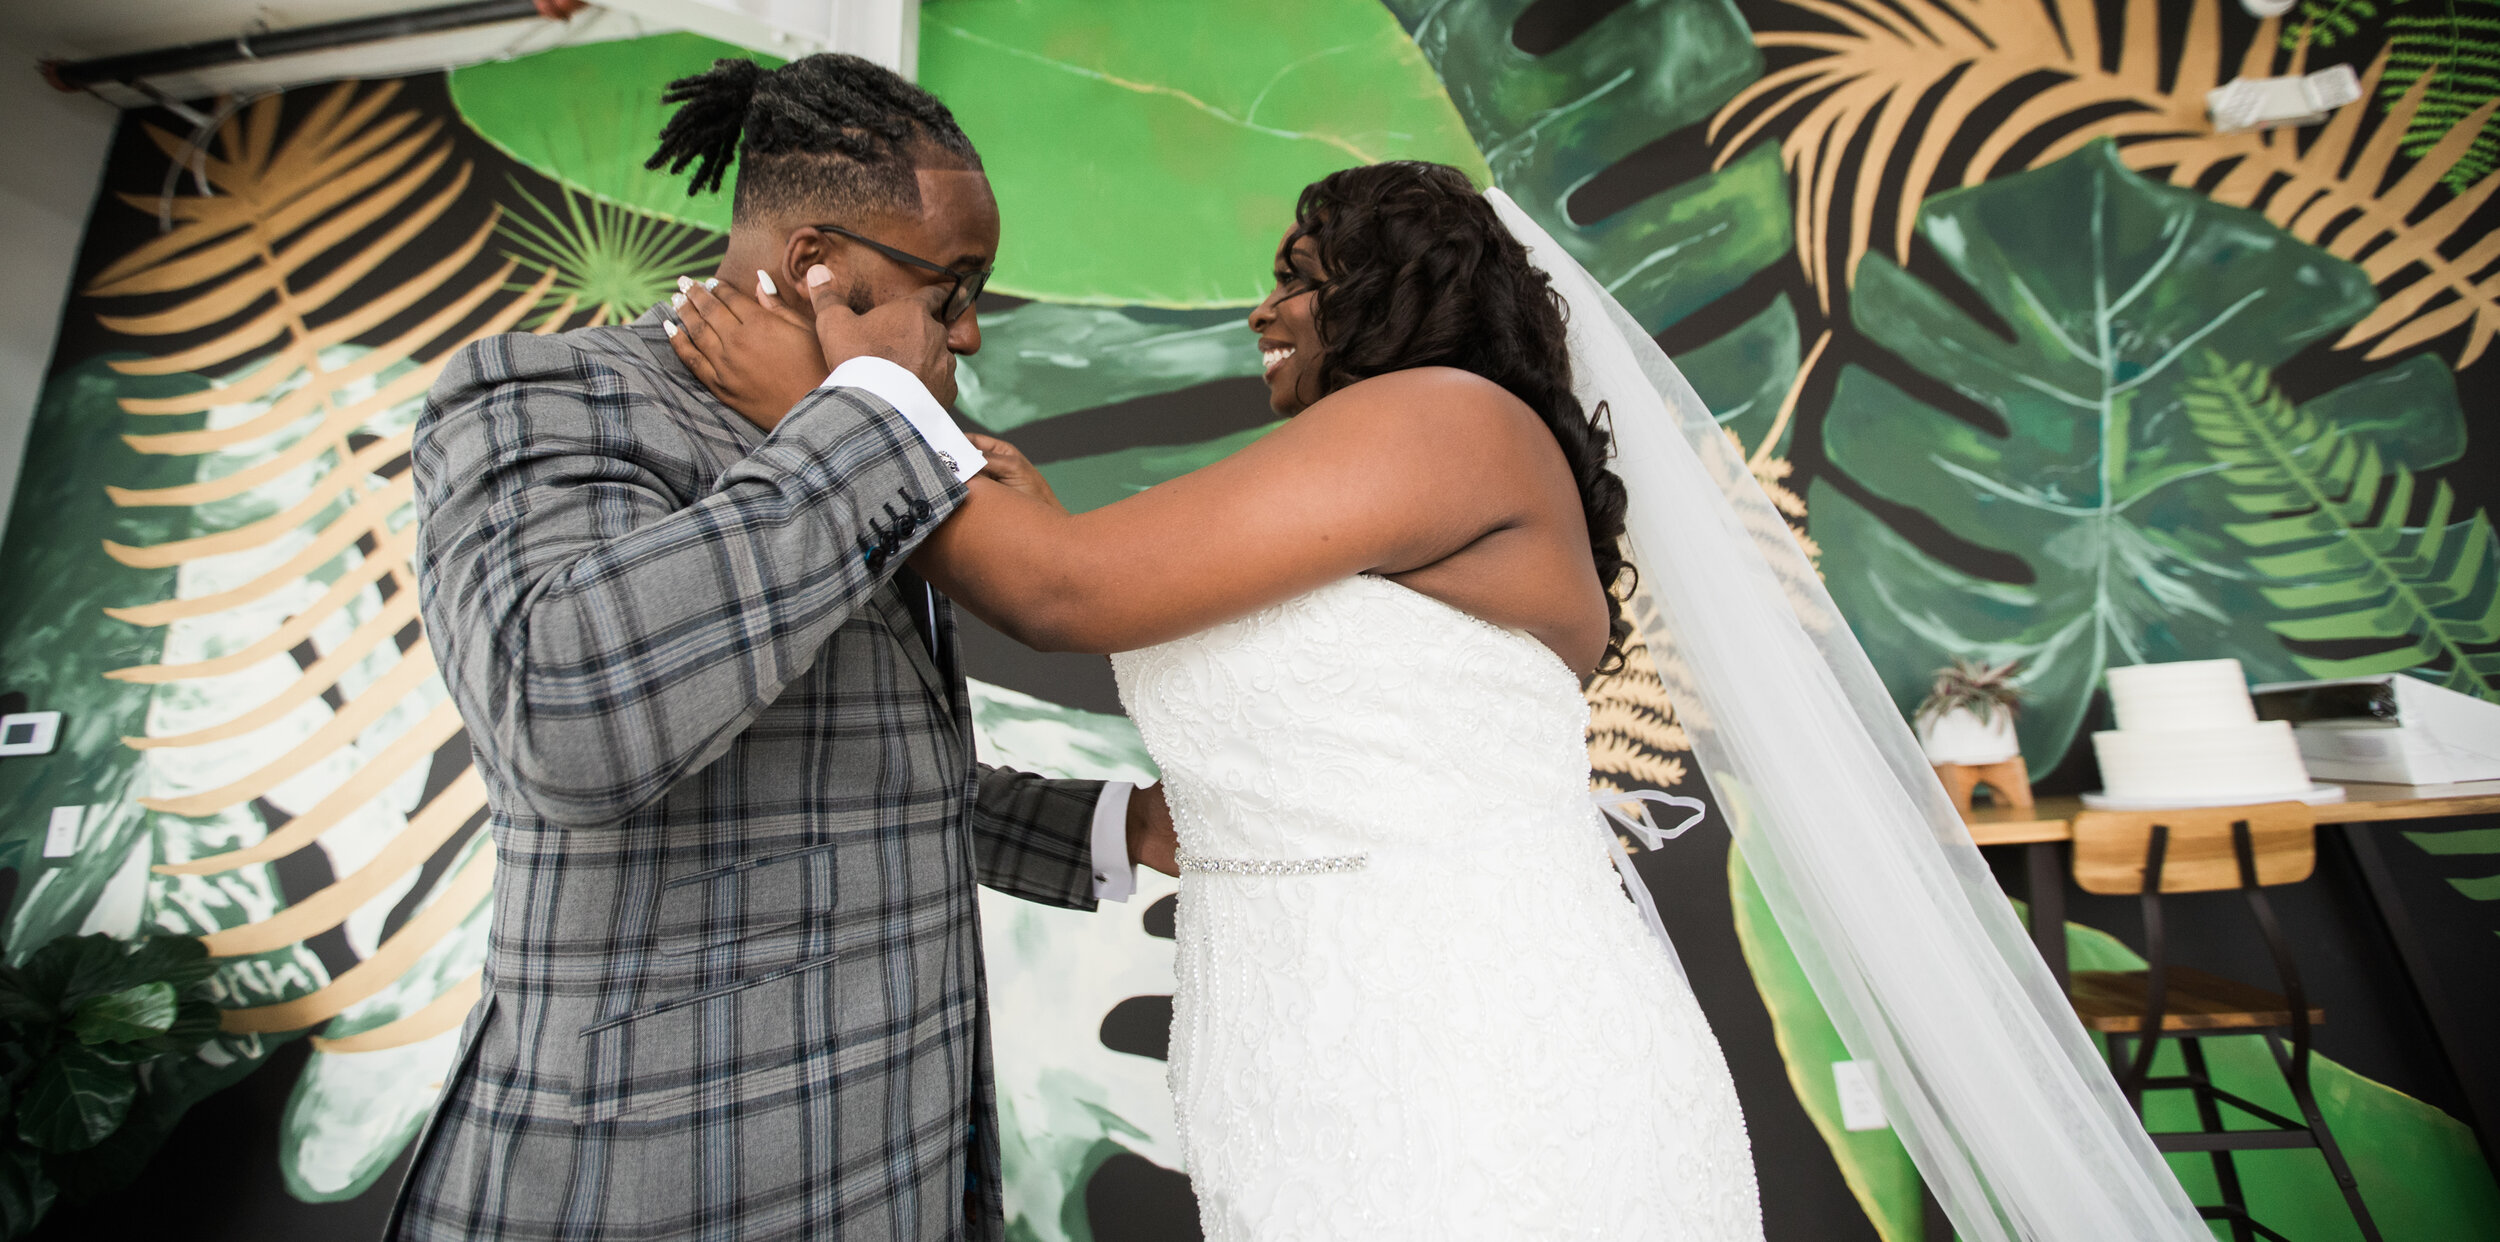 Silver and Black Wedding at Habitat at Seya in Baltimore City MAryland Husband and wife wedding photographers Megapixels Media Photography Curvy Bride (24 of 79).jpg